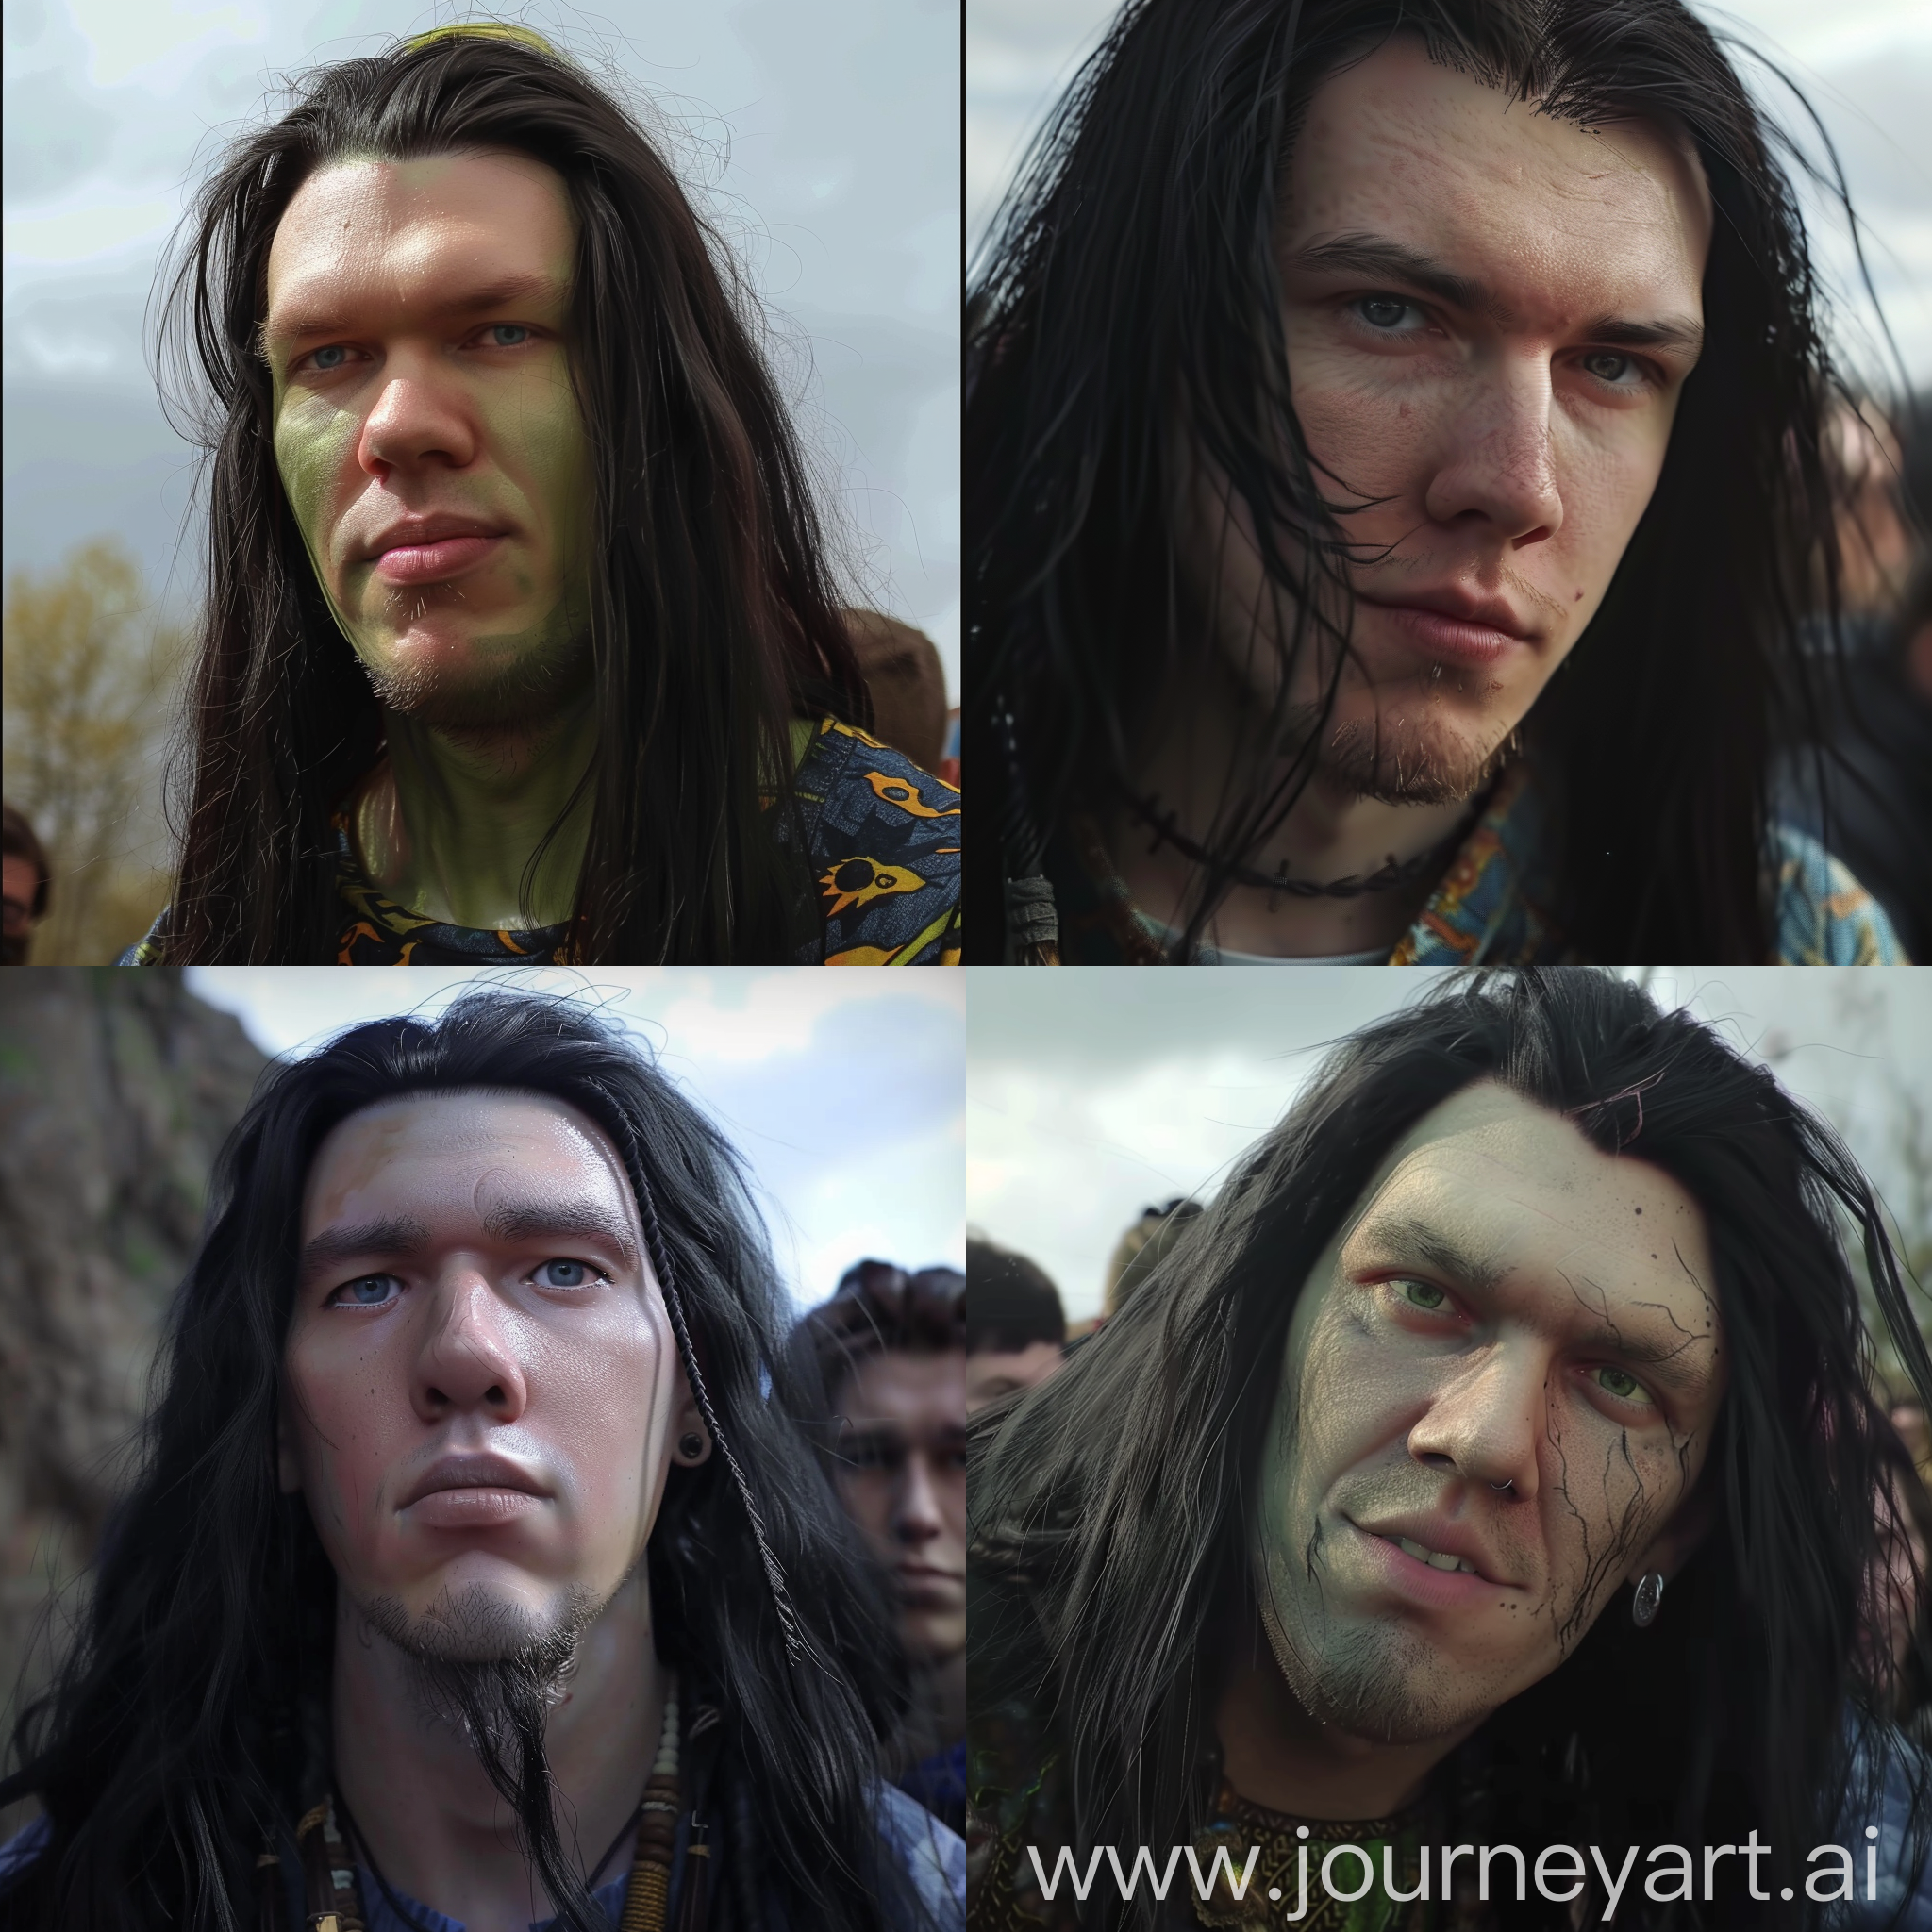 Slovak YouTuber FiFqo, with long black hair being in a Shrek Movie, Shrek Movie 3D Graphics Style, wide shot, YouTuber, FiFqo, Filip Jánoš, use this picture of his face as sample: https://cdn.discordapp.com/attachments/828359970583216138/1226134617950781544/image.png?ex=6623a9d9&is=661134d9&hm=8e0699886e6a9b735ed10b358e7afb51e726b161103d56a9aba1cbcdc2d90628& make sure you preserve his face well